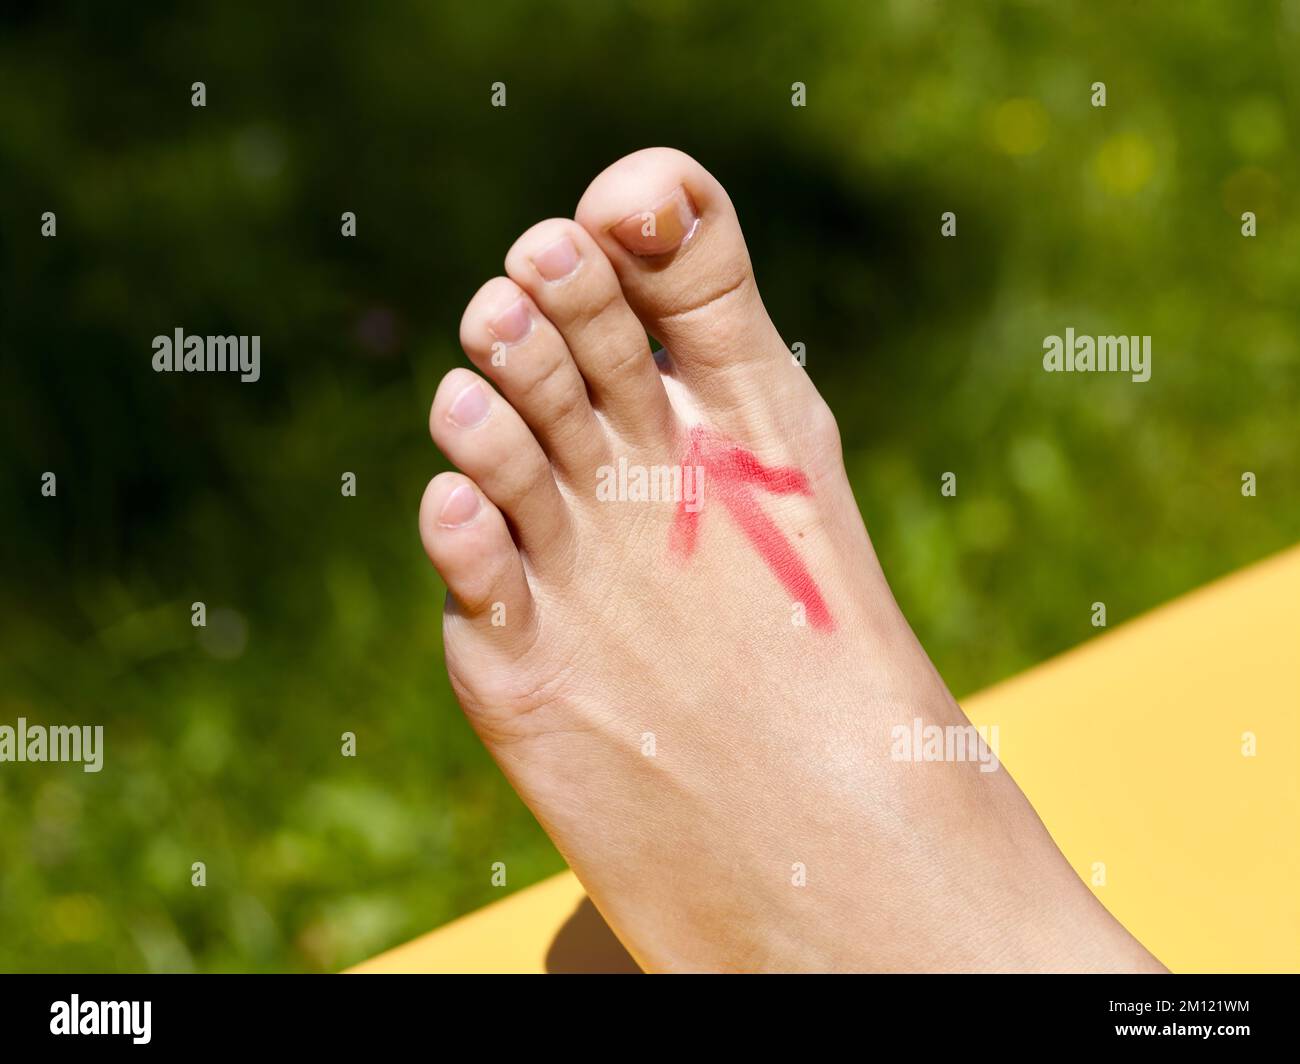 Barefoot walking - close-up of a woman's foot with reflexology zone drawn on the back of the foot in the shape of an arrow Stock Photo